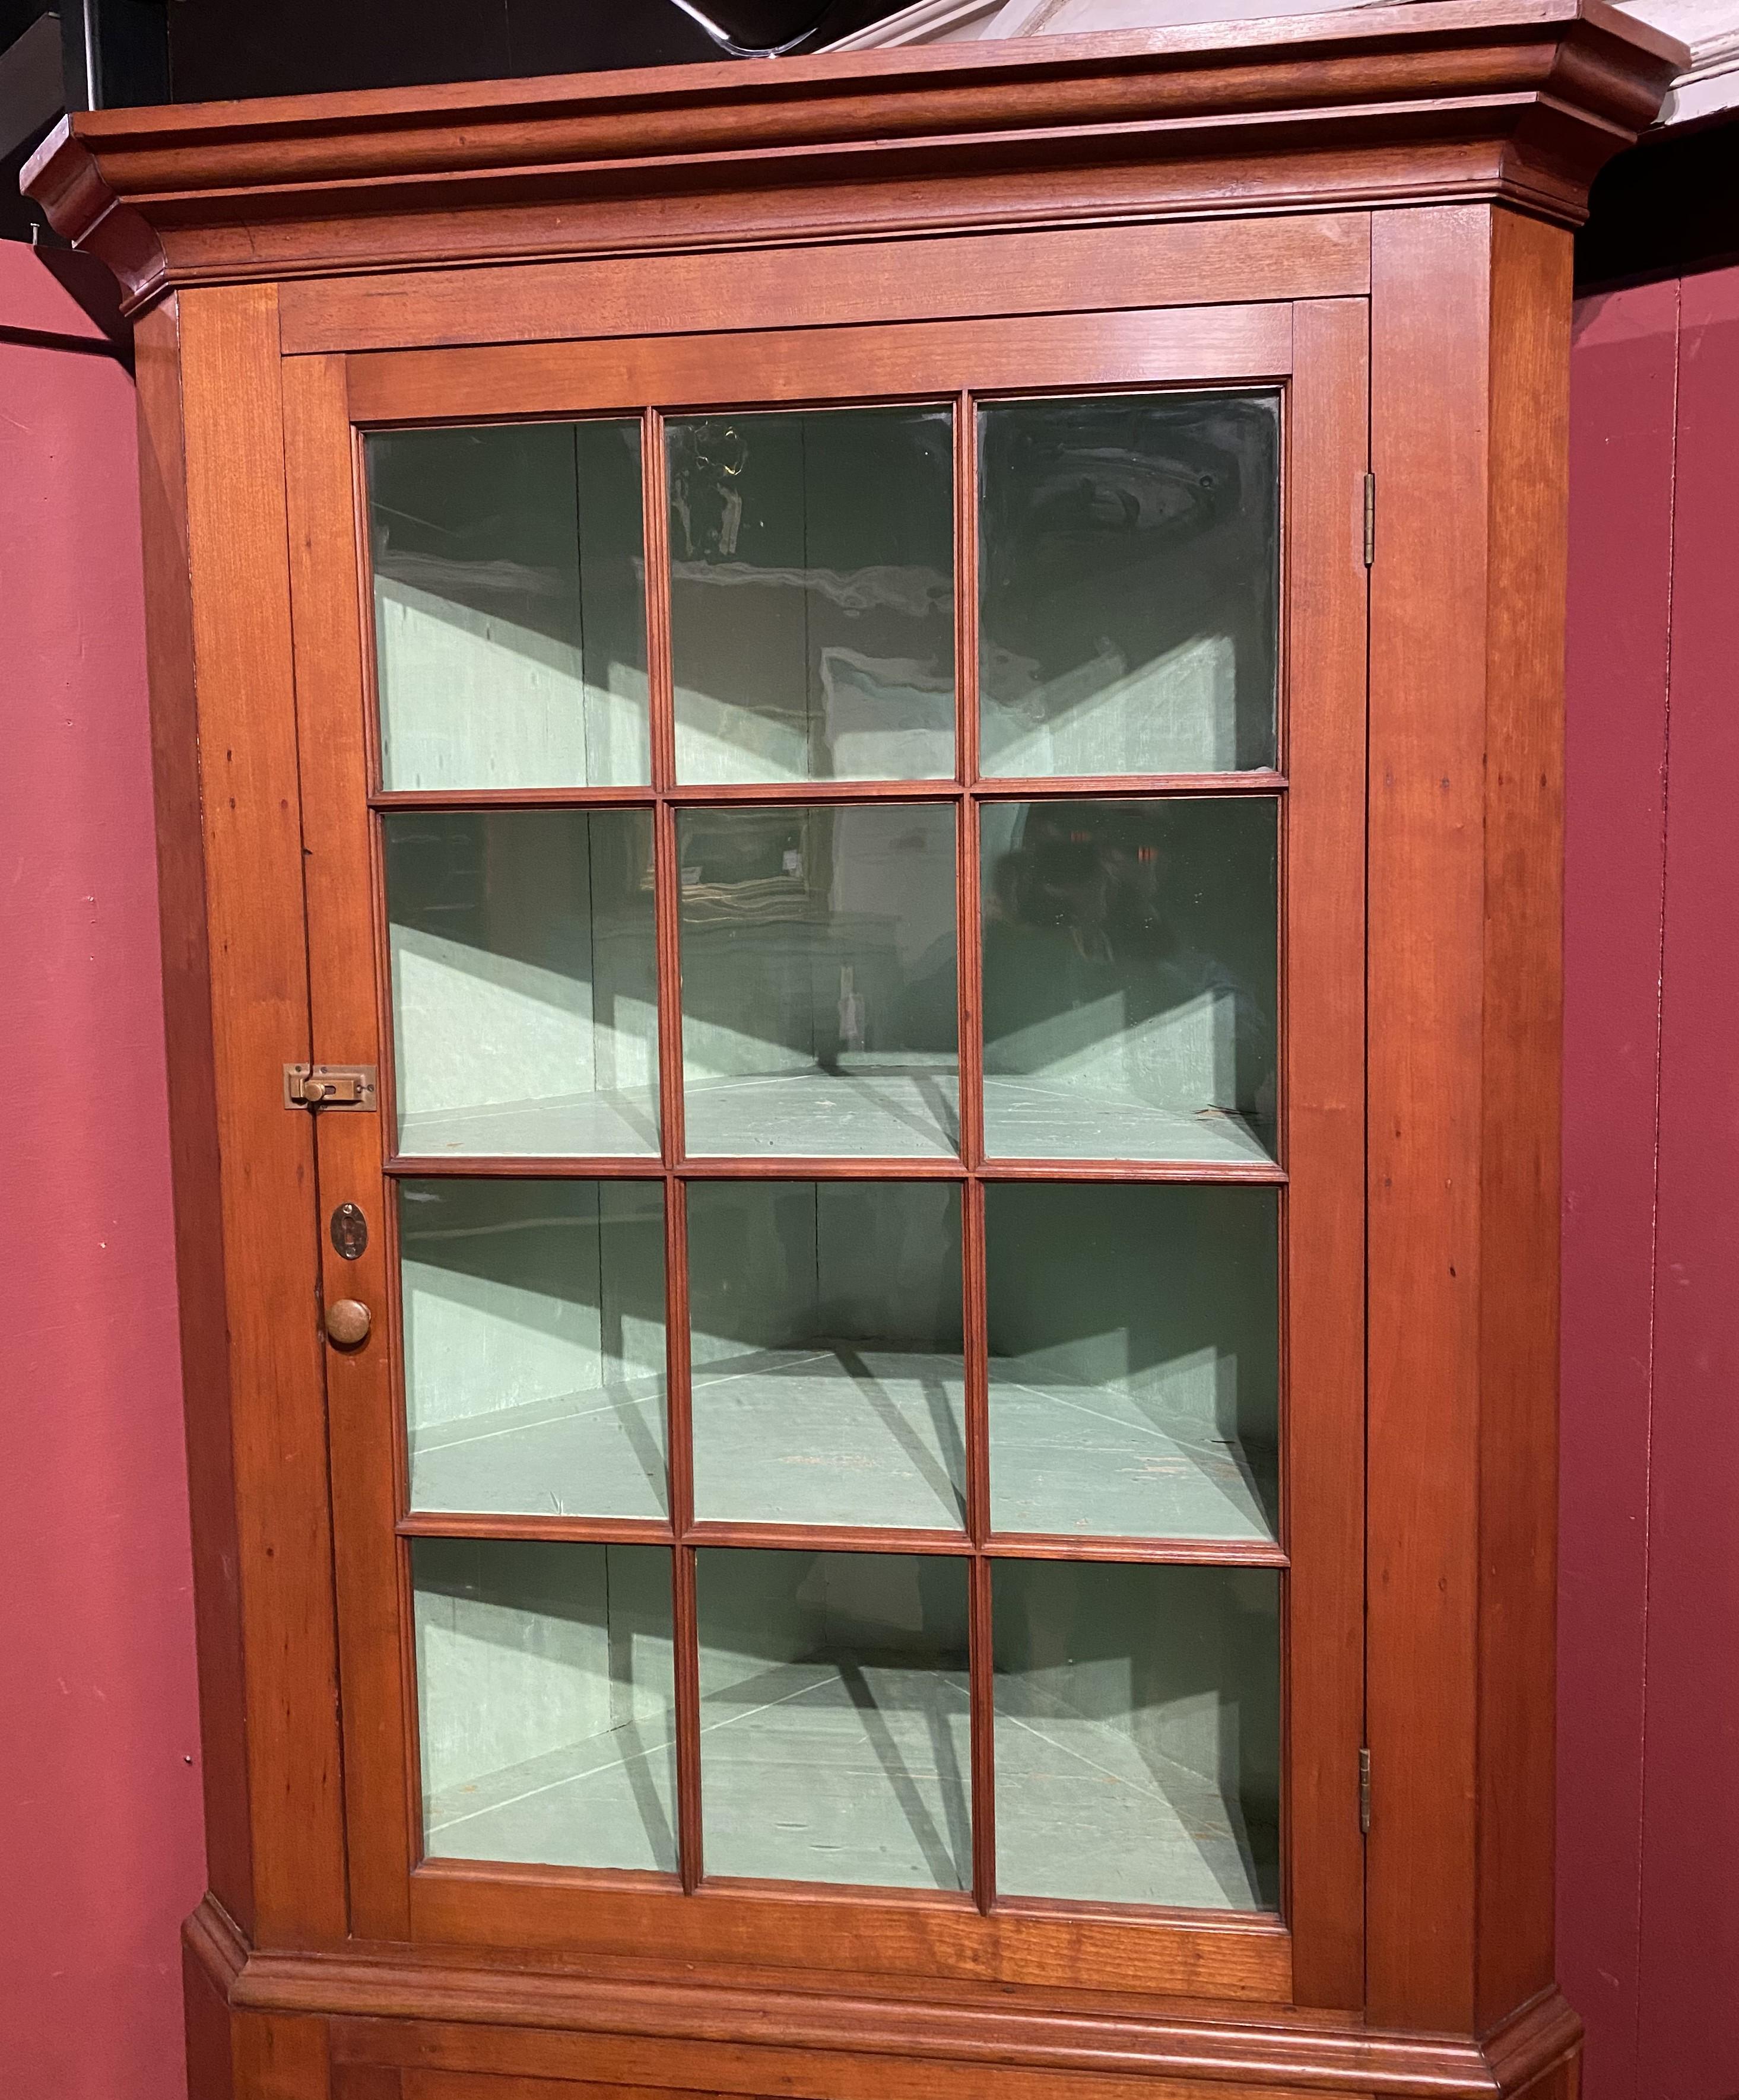 A fine example of a Federal two part corner cupboard, its upper case with a single glass door, opening to a light green painted interior with two shelves, over a lower case with two blind paneled doors, opening to a single shelf storage compartment,